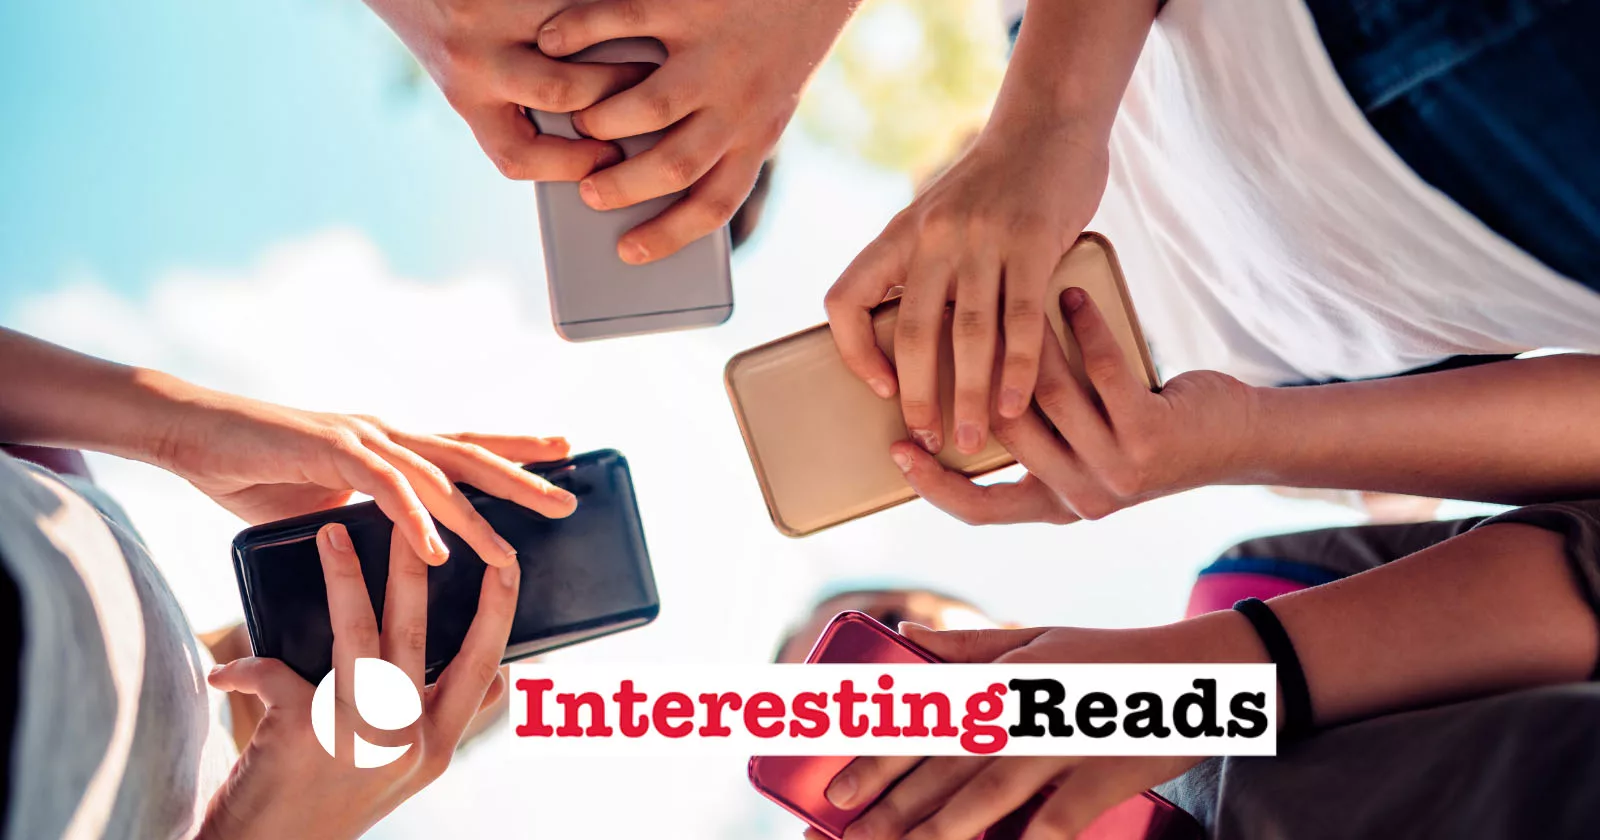 Group of people using smartphones with "InterestingReads" logo overhead